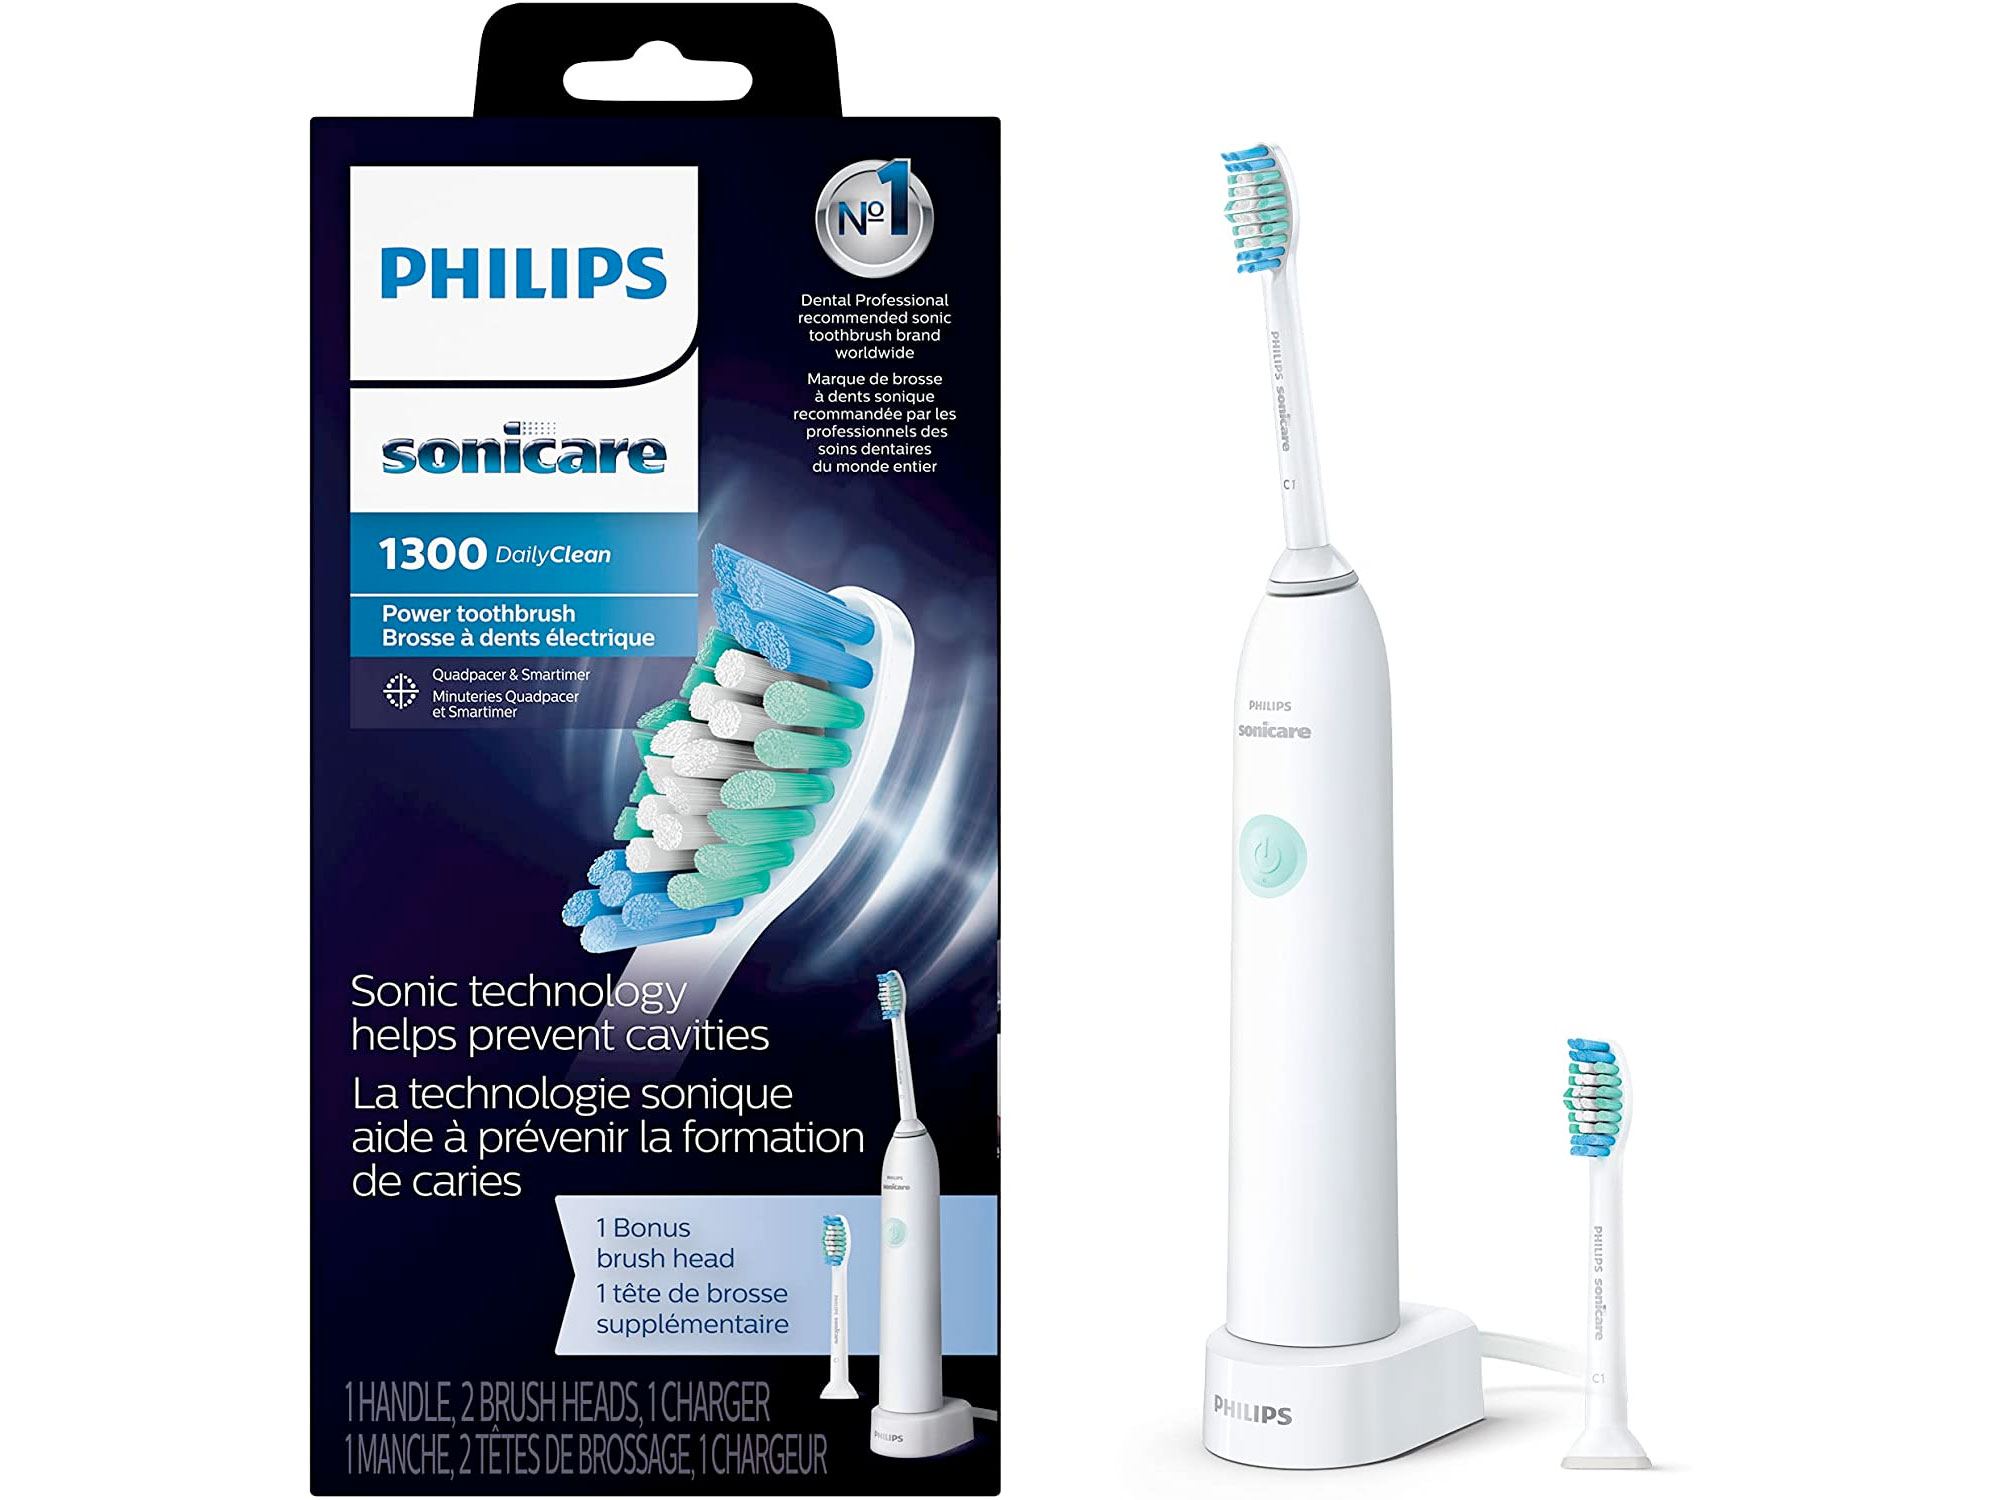 Amazon：Philips Sonicare DailyClean 1300 Rechargeable Electric Toothbrush只賣$24.99